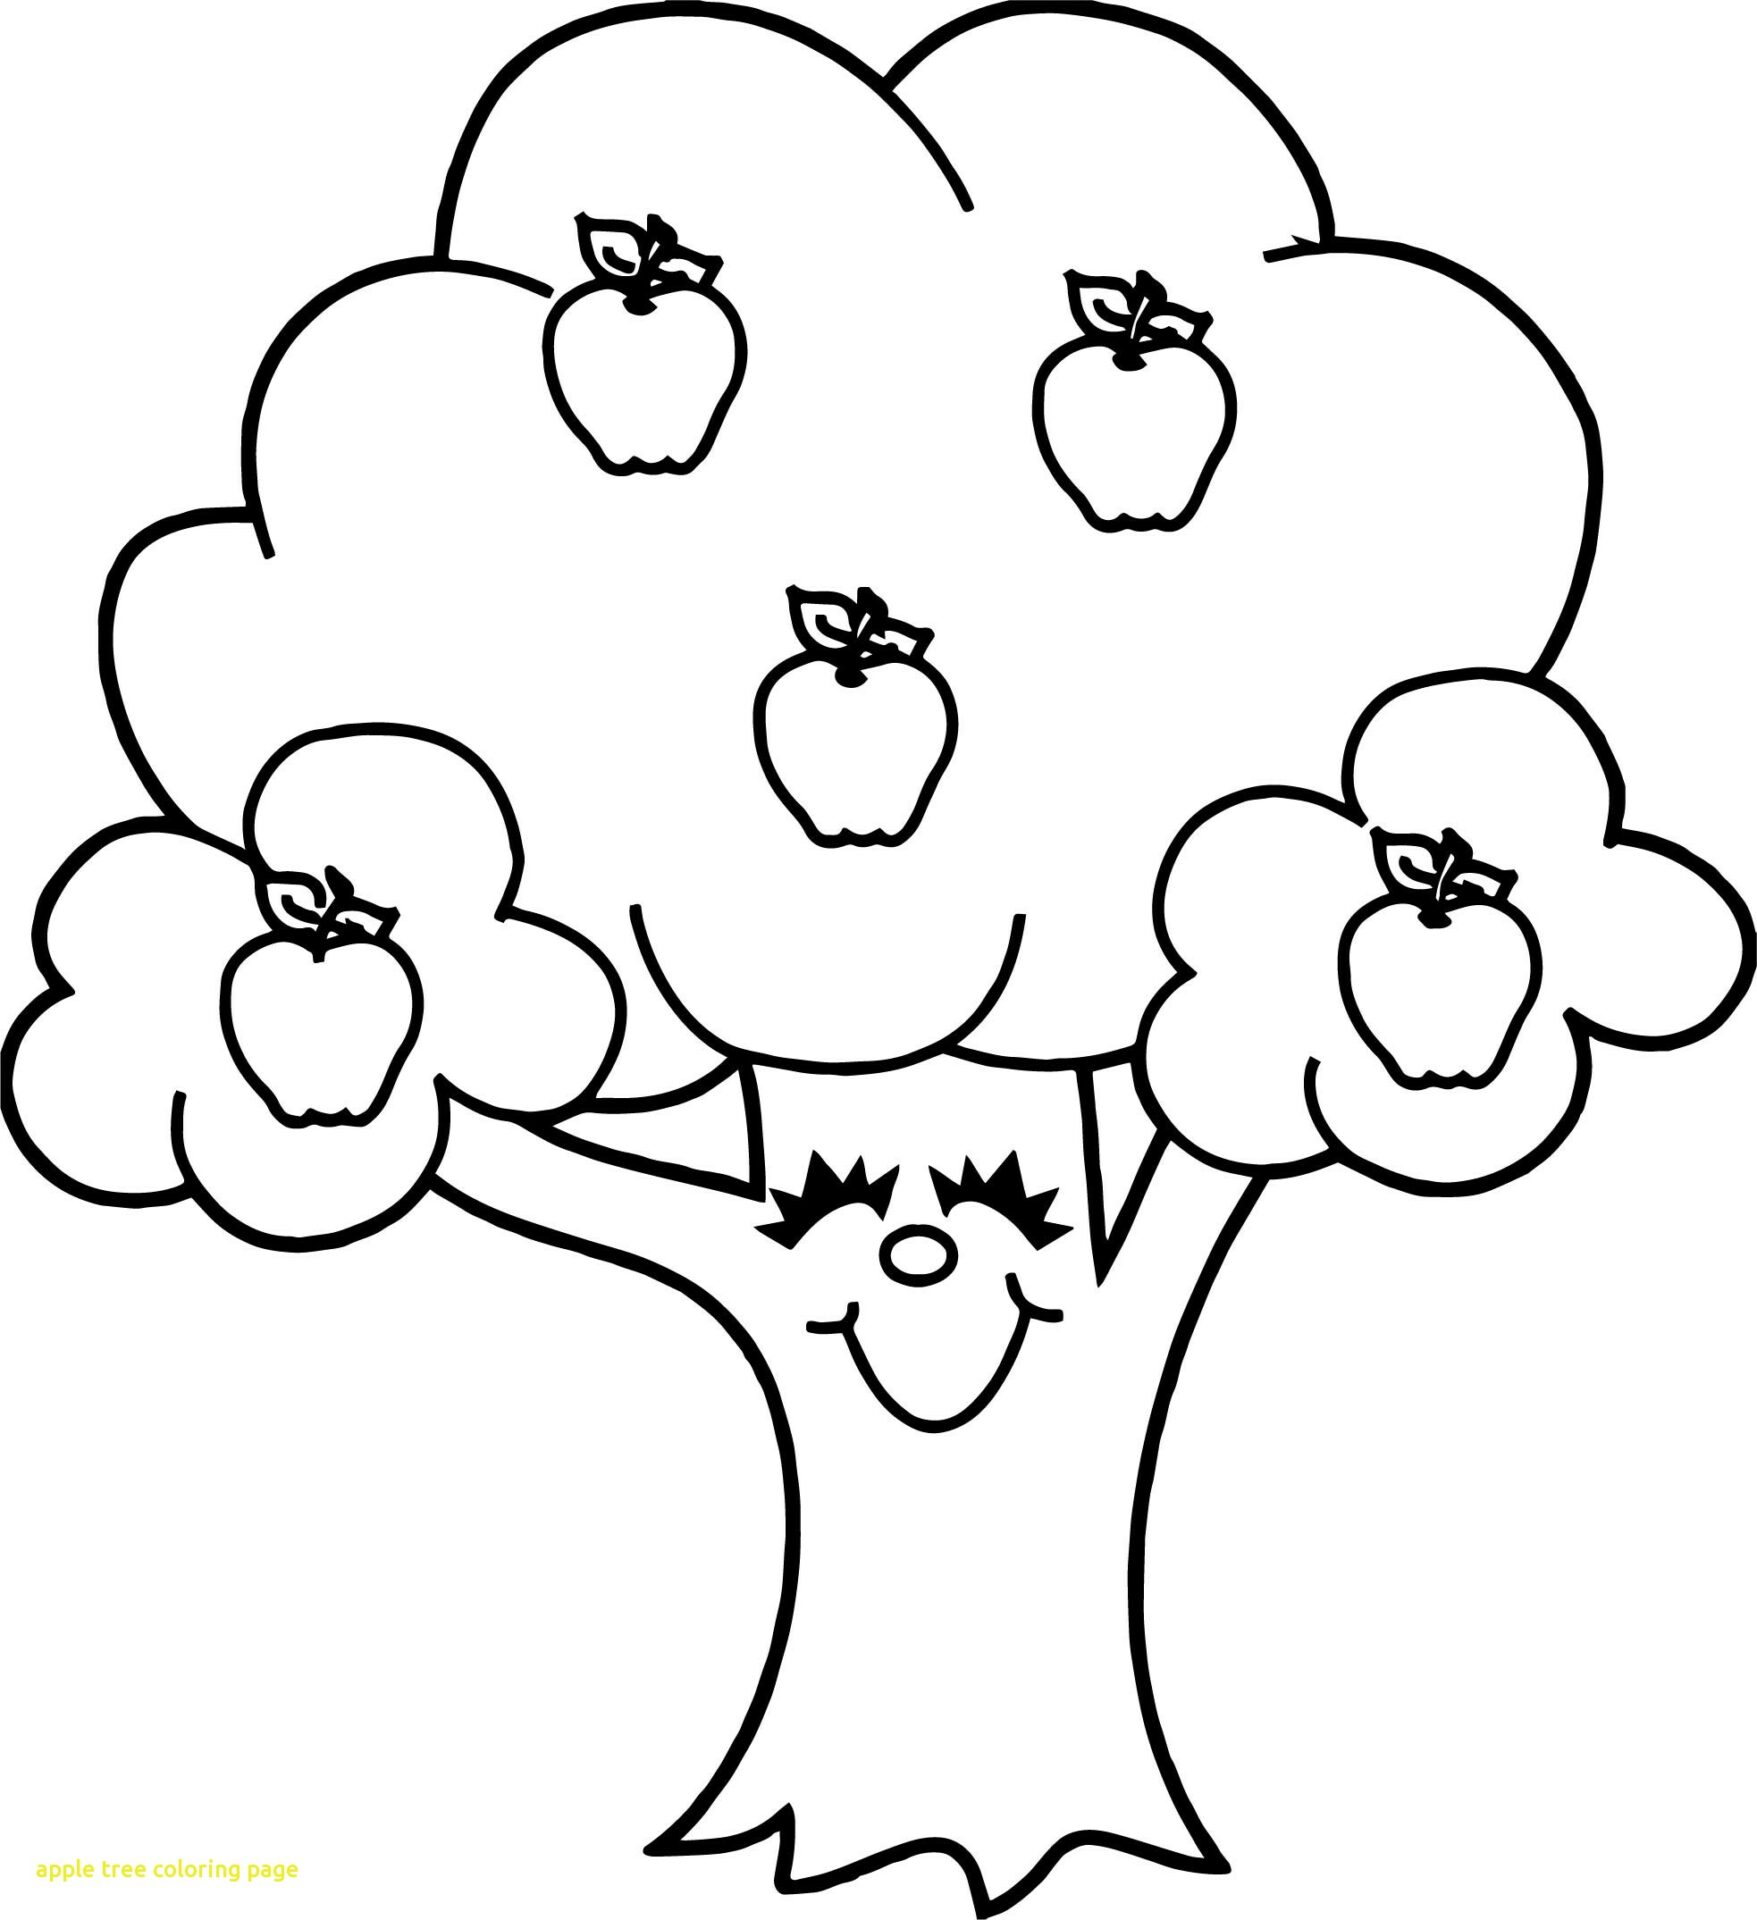 apple-tree-printable-coloring-pages